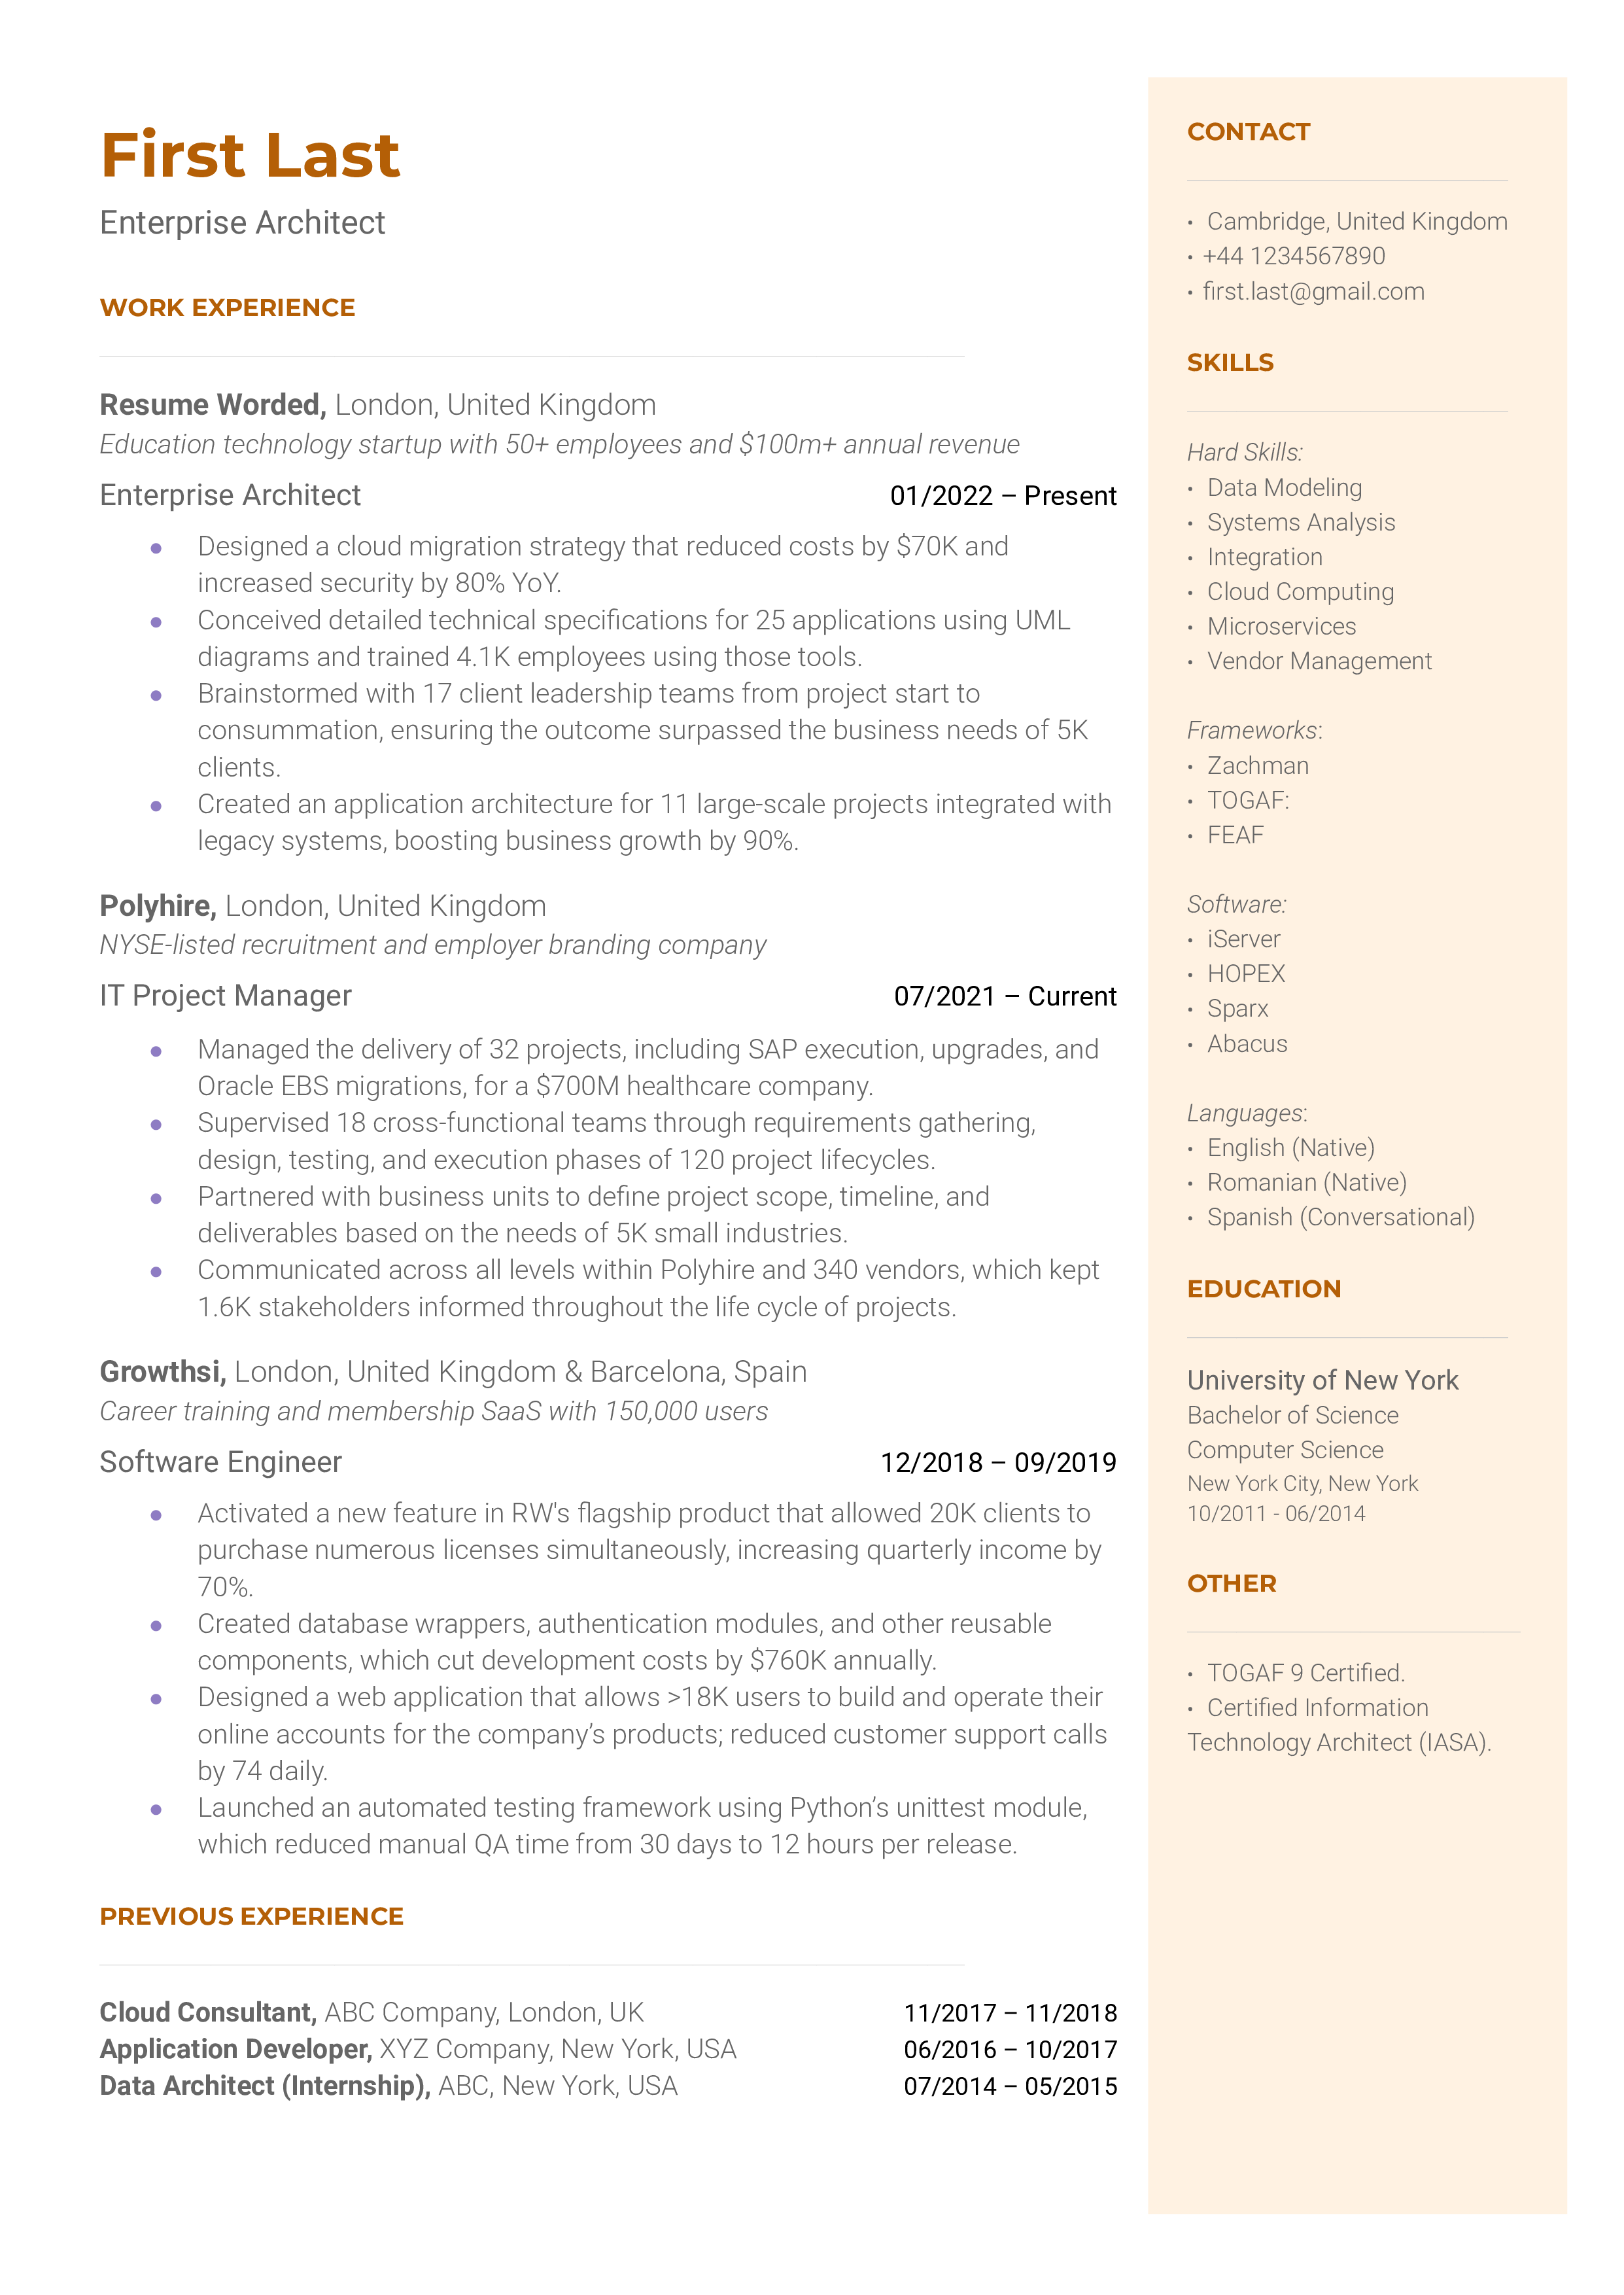 An enterprise architect resume template that’s tailored to the IT industry